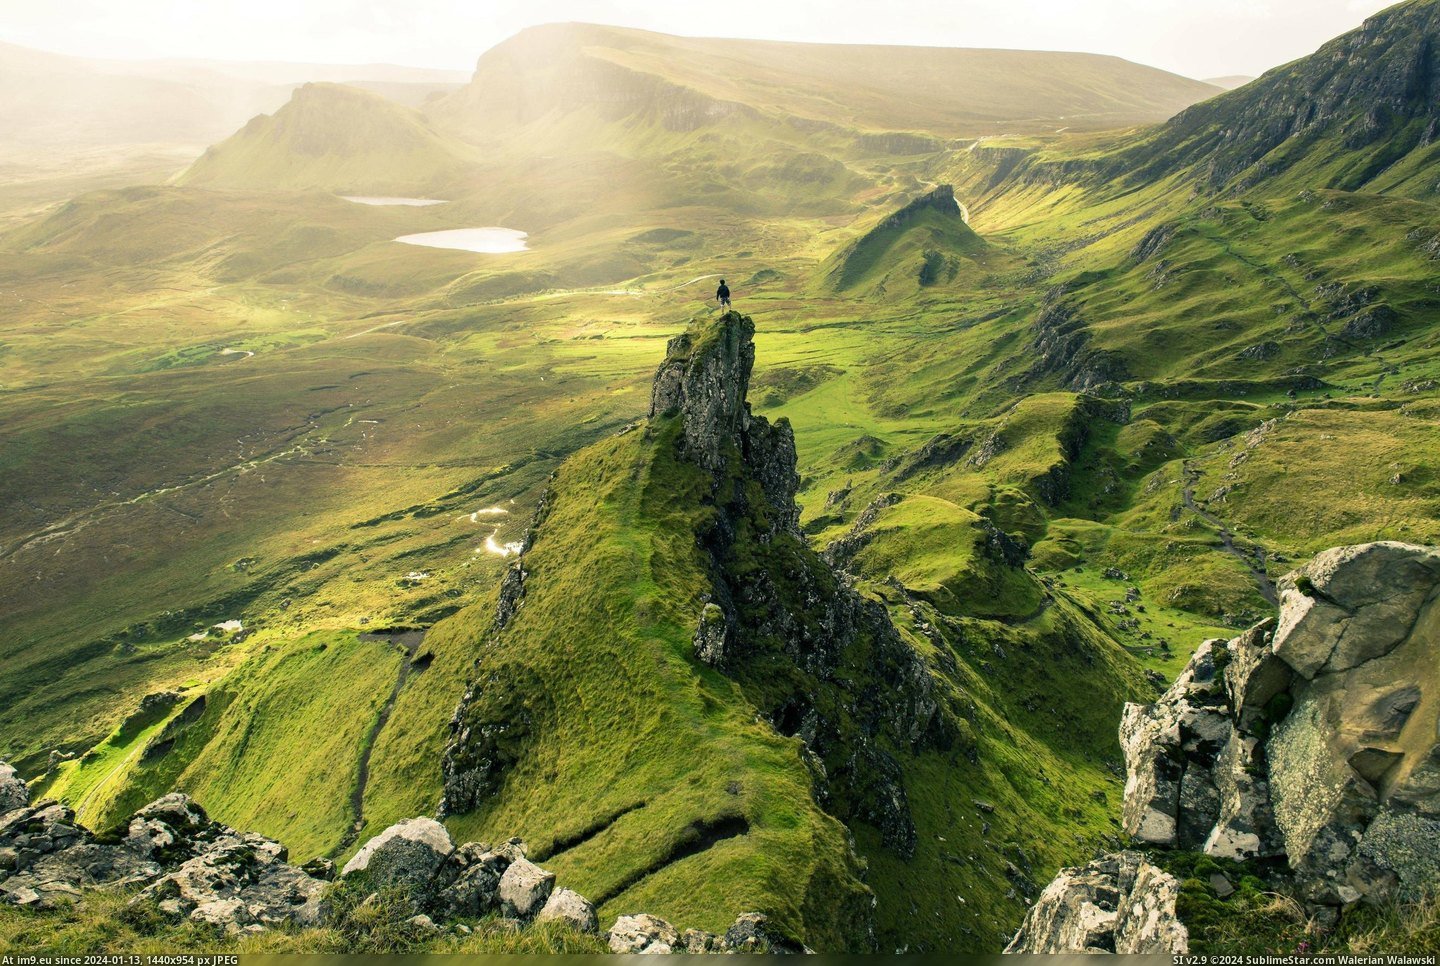 #Was #Area #Isle #Suggested #Quiraing #Skye #Scenery [Earthporn] I was suggested to post this here. This is the Quiraing area of the Isle of Skye, with me taking in the scenery. [26 Pic. (Image of album My r/EARTHPORN favs))